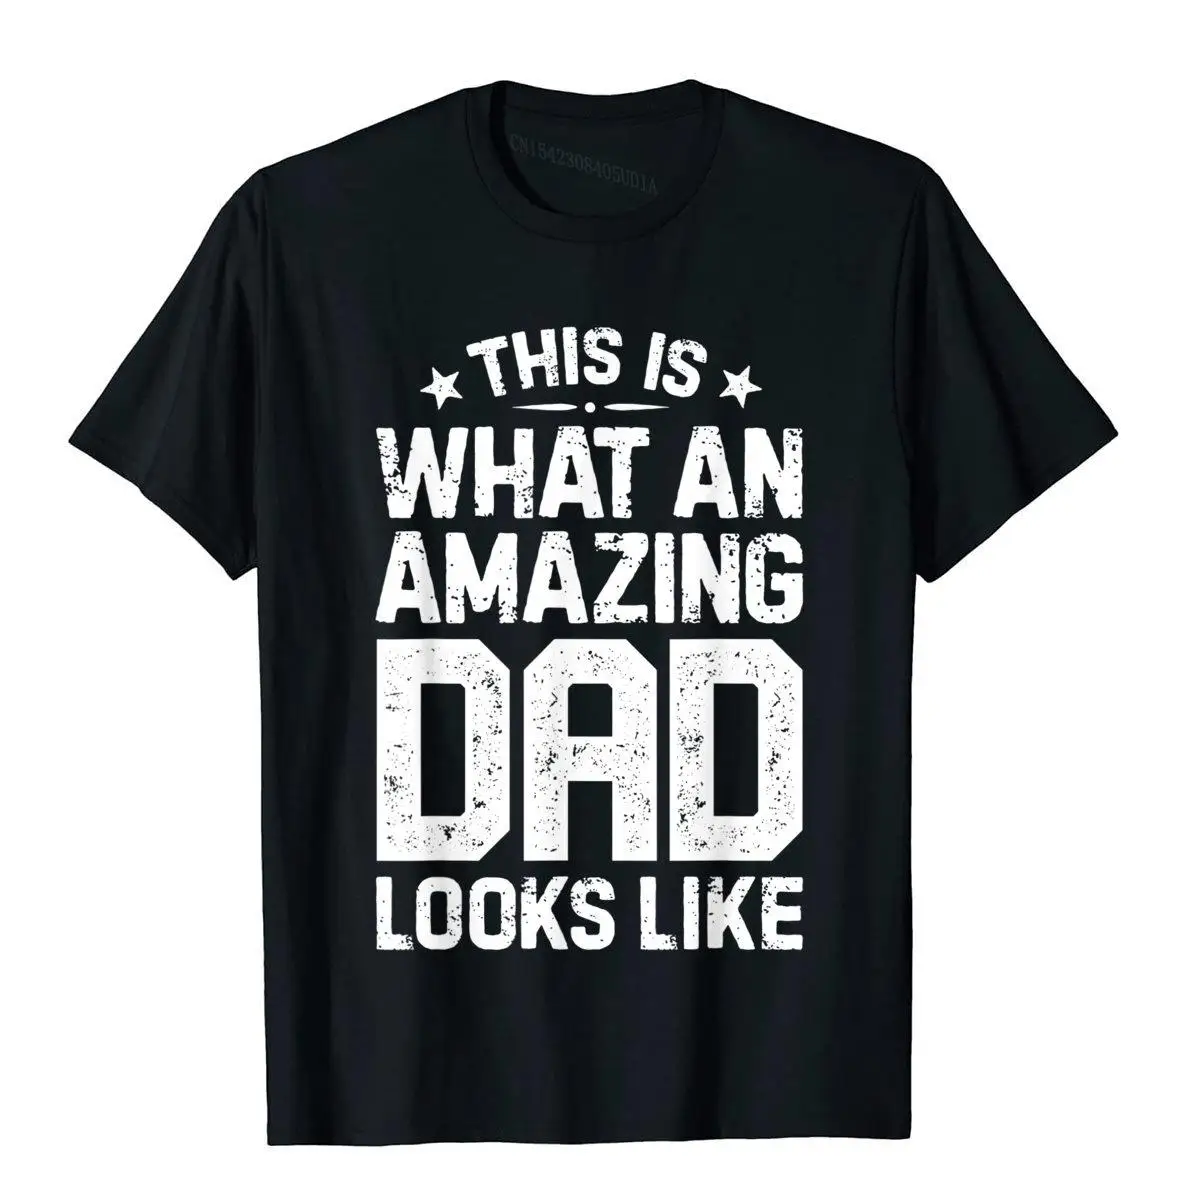 

This Is What An Amazing Dad Looks Like Funny Fathers Day T-Shirt T Shirts Tops Tees Prevalent Cotton Design Printed On Men